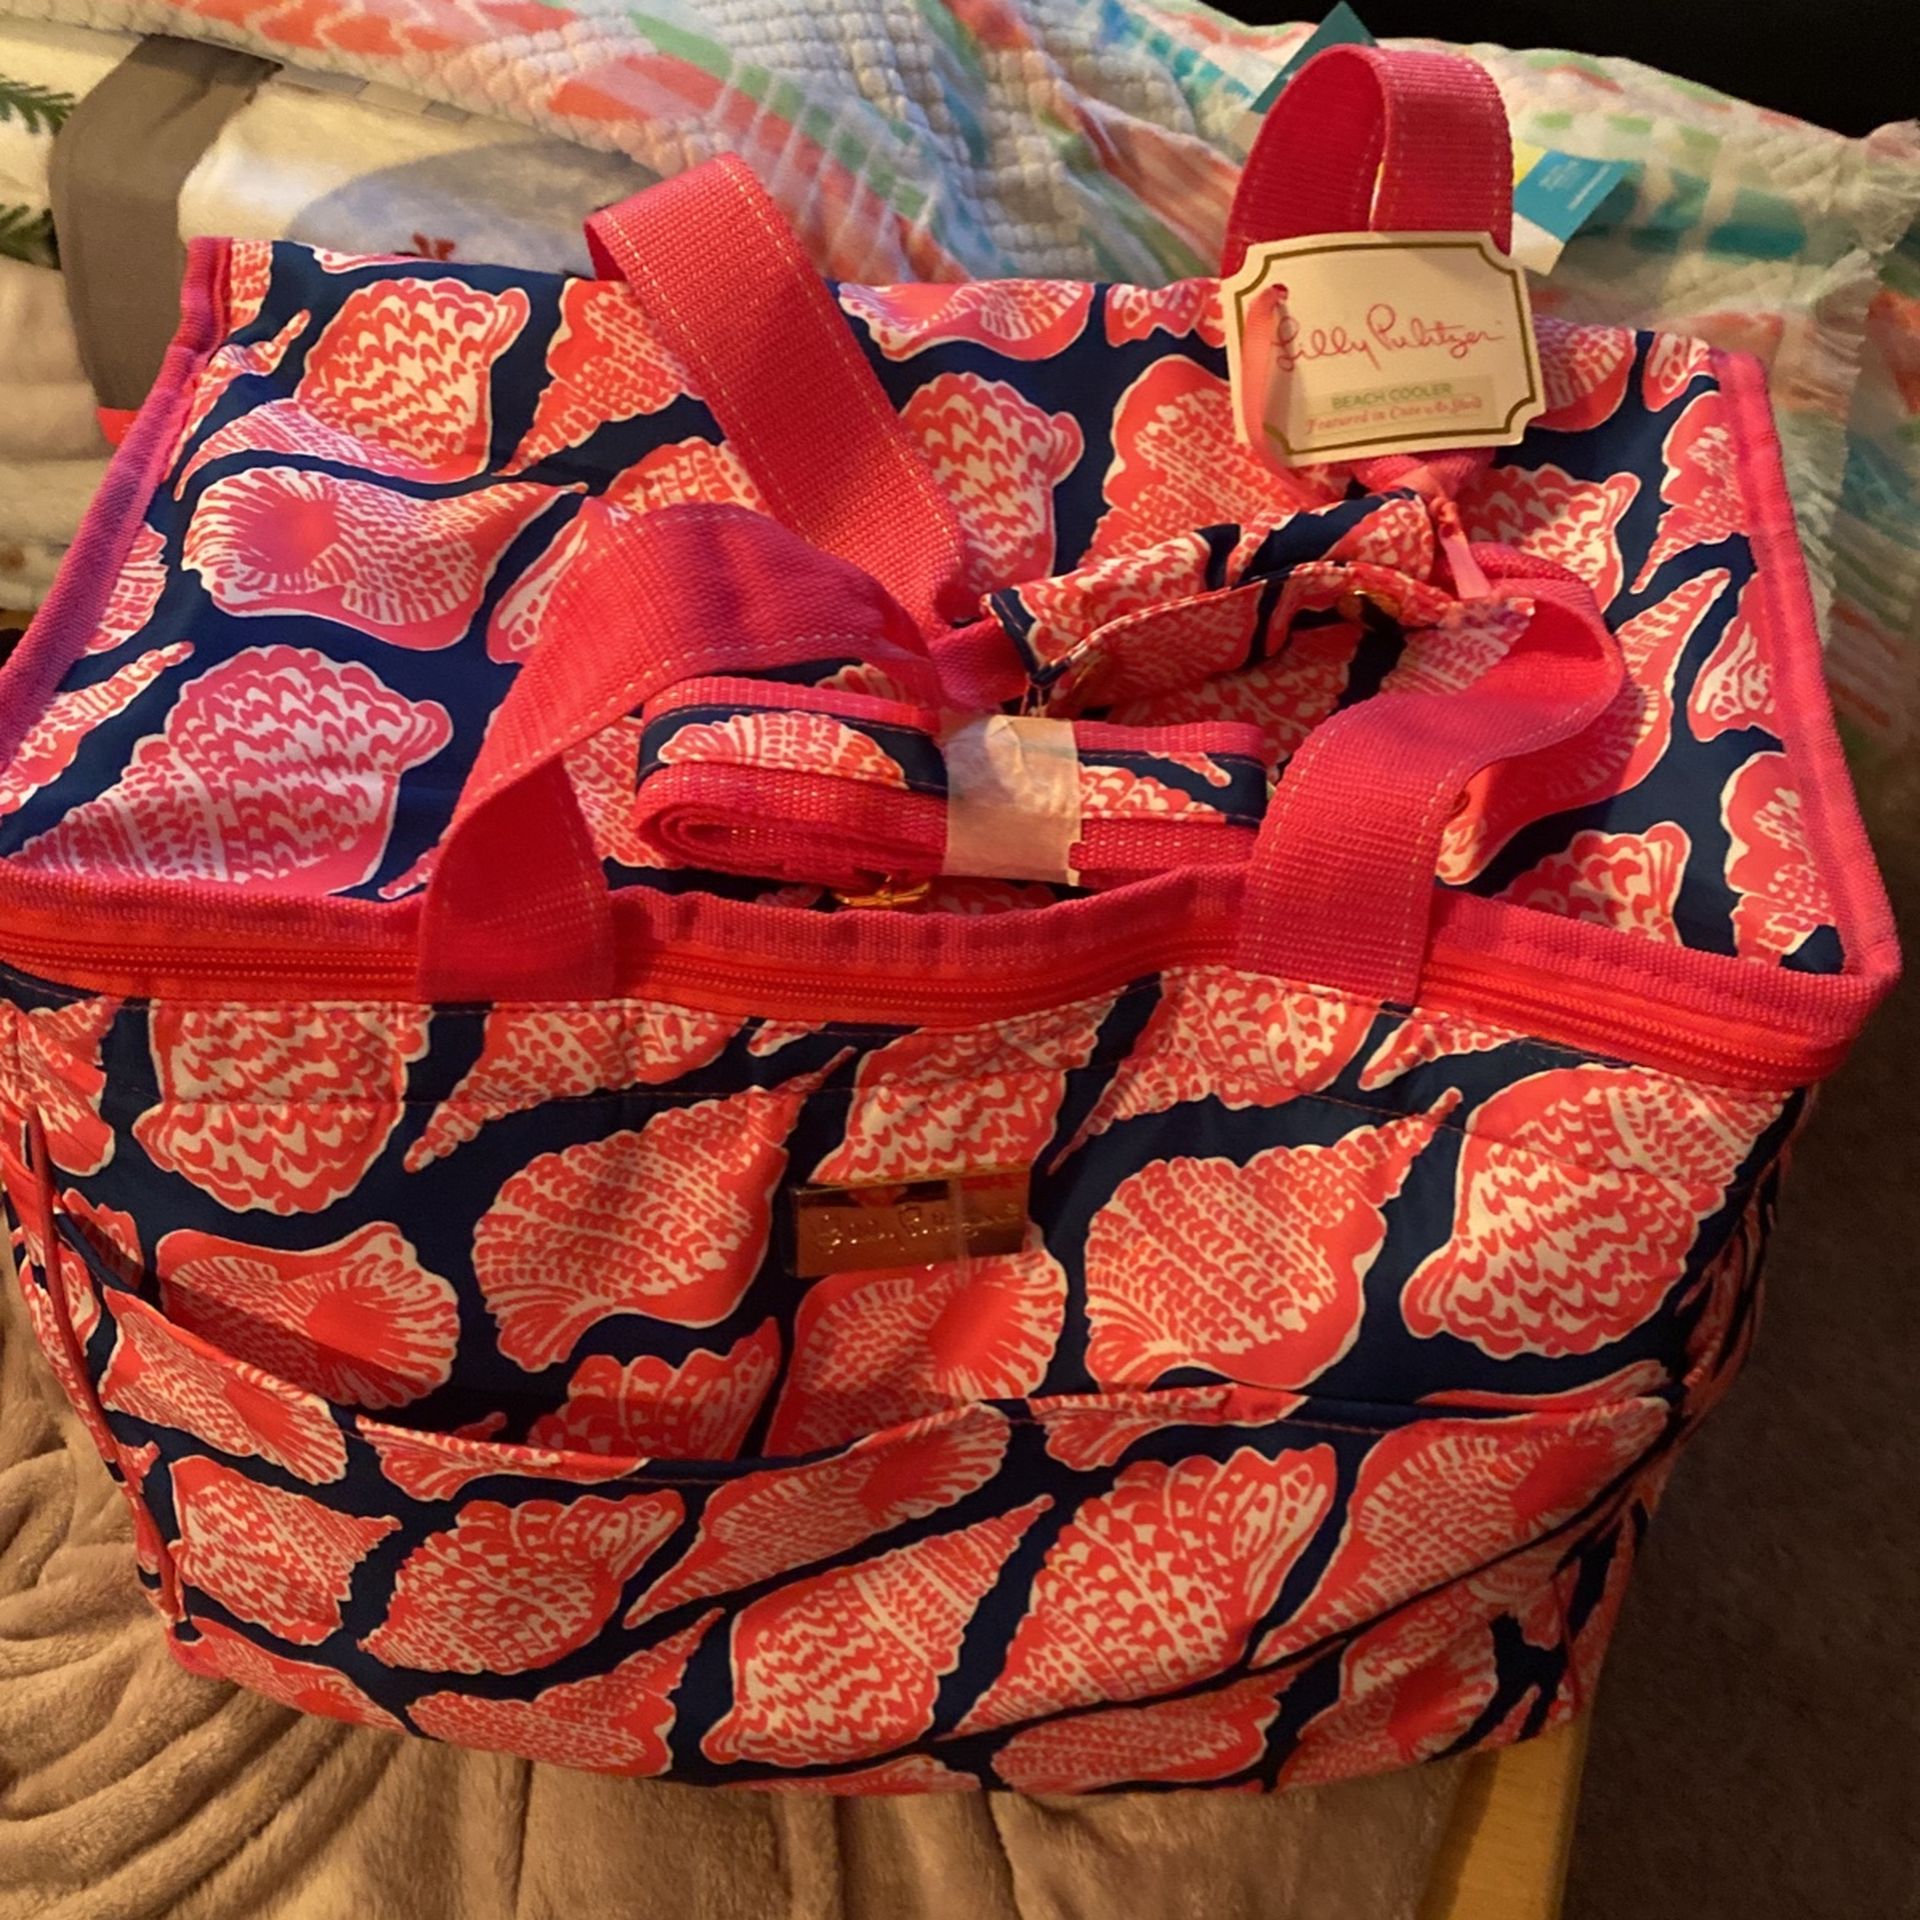 Lilly Pulitzer Beach Cooler Bag NEW